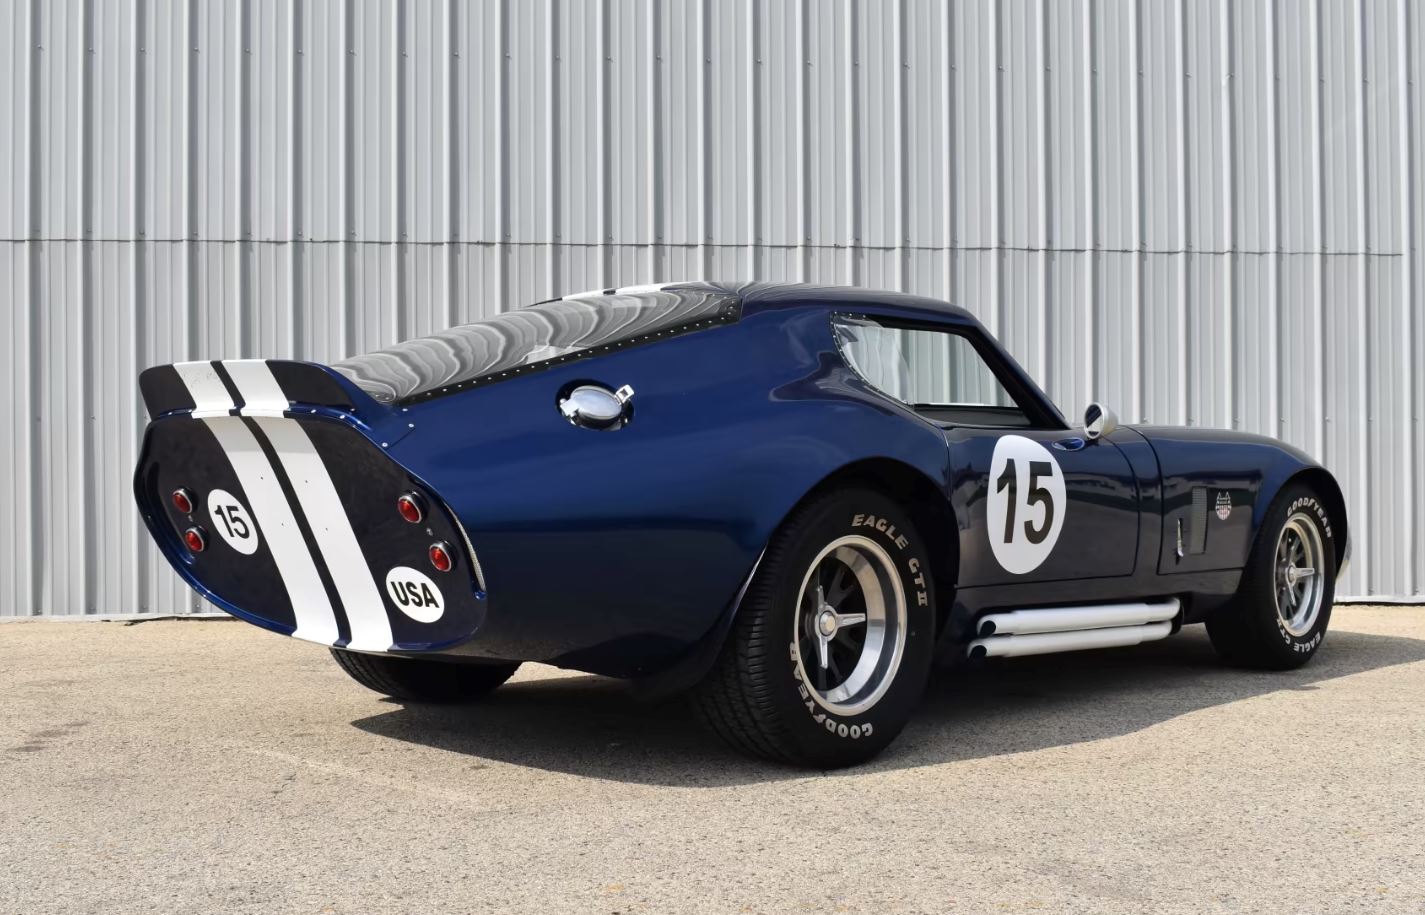 Ford factory five shelby daytona coupe replica bswr0ze8zac51afq32tub